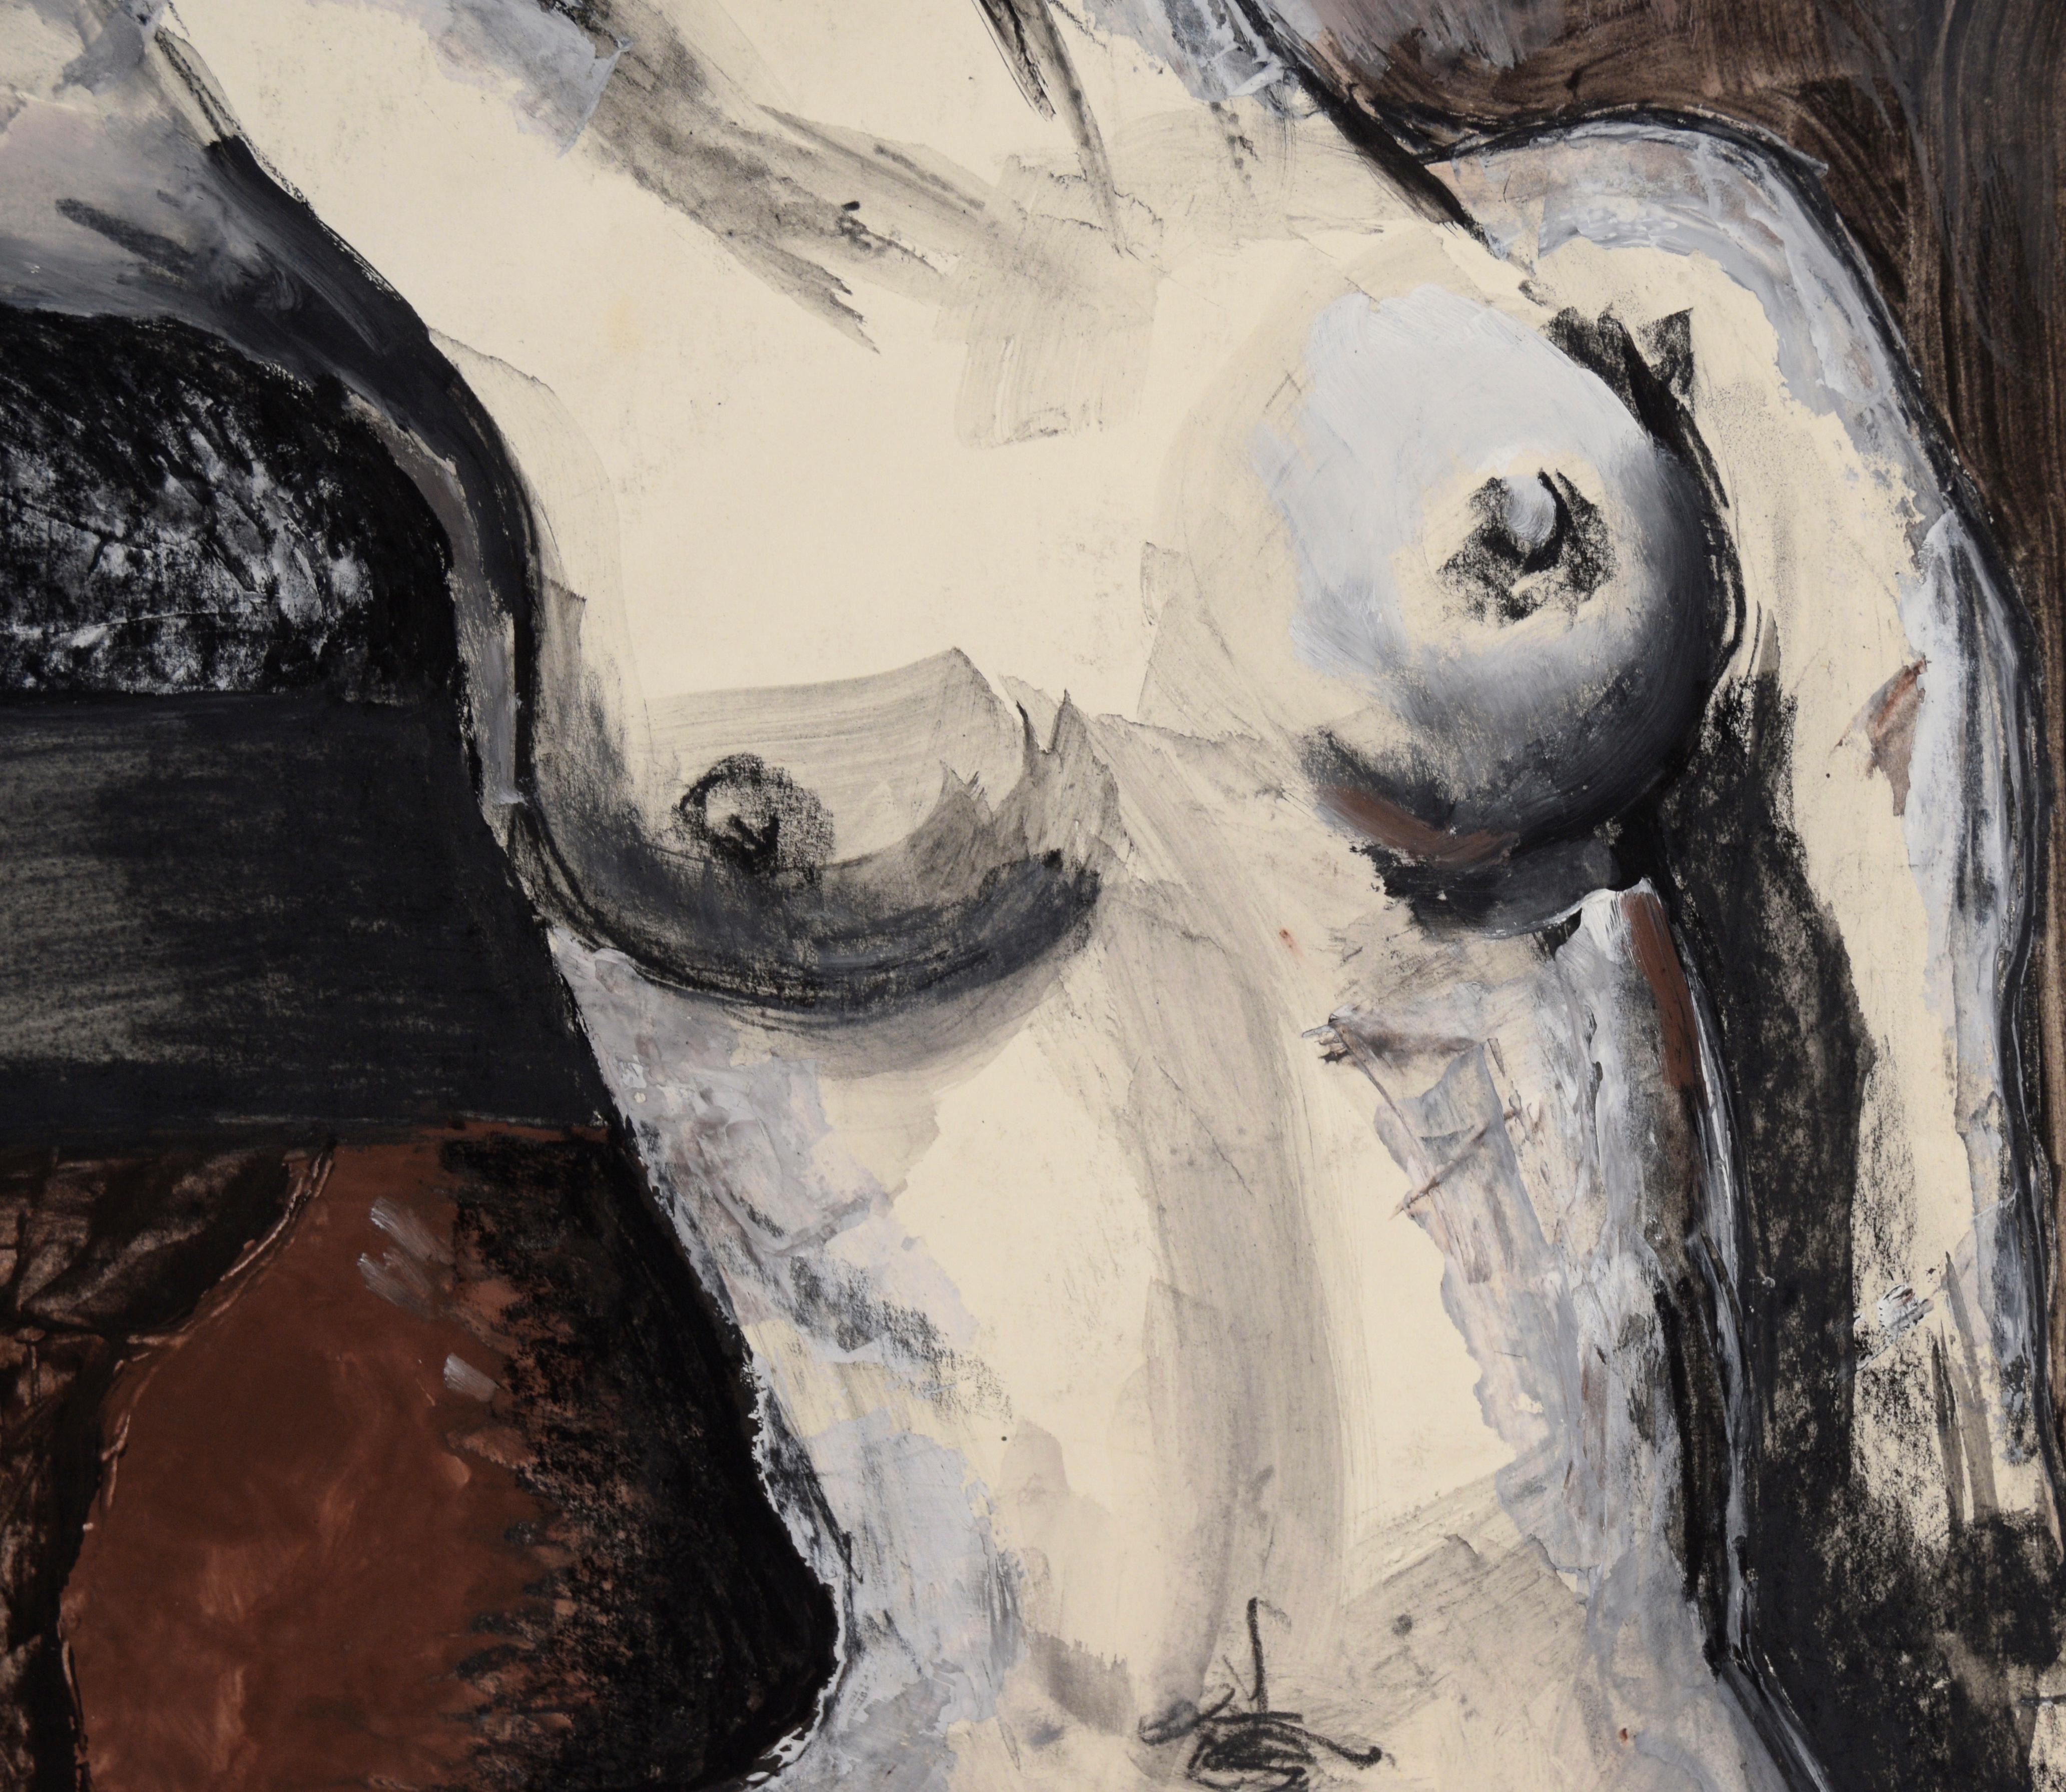 Black and White Nude Woman in Acrylic, Gouache, and Charcoal on Paper

Black and white painting of a woman by acclaimed bluegrass musician Katherine 